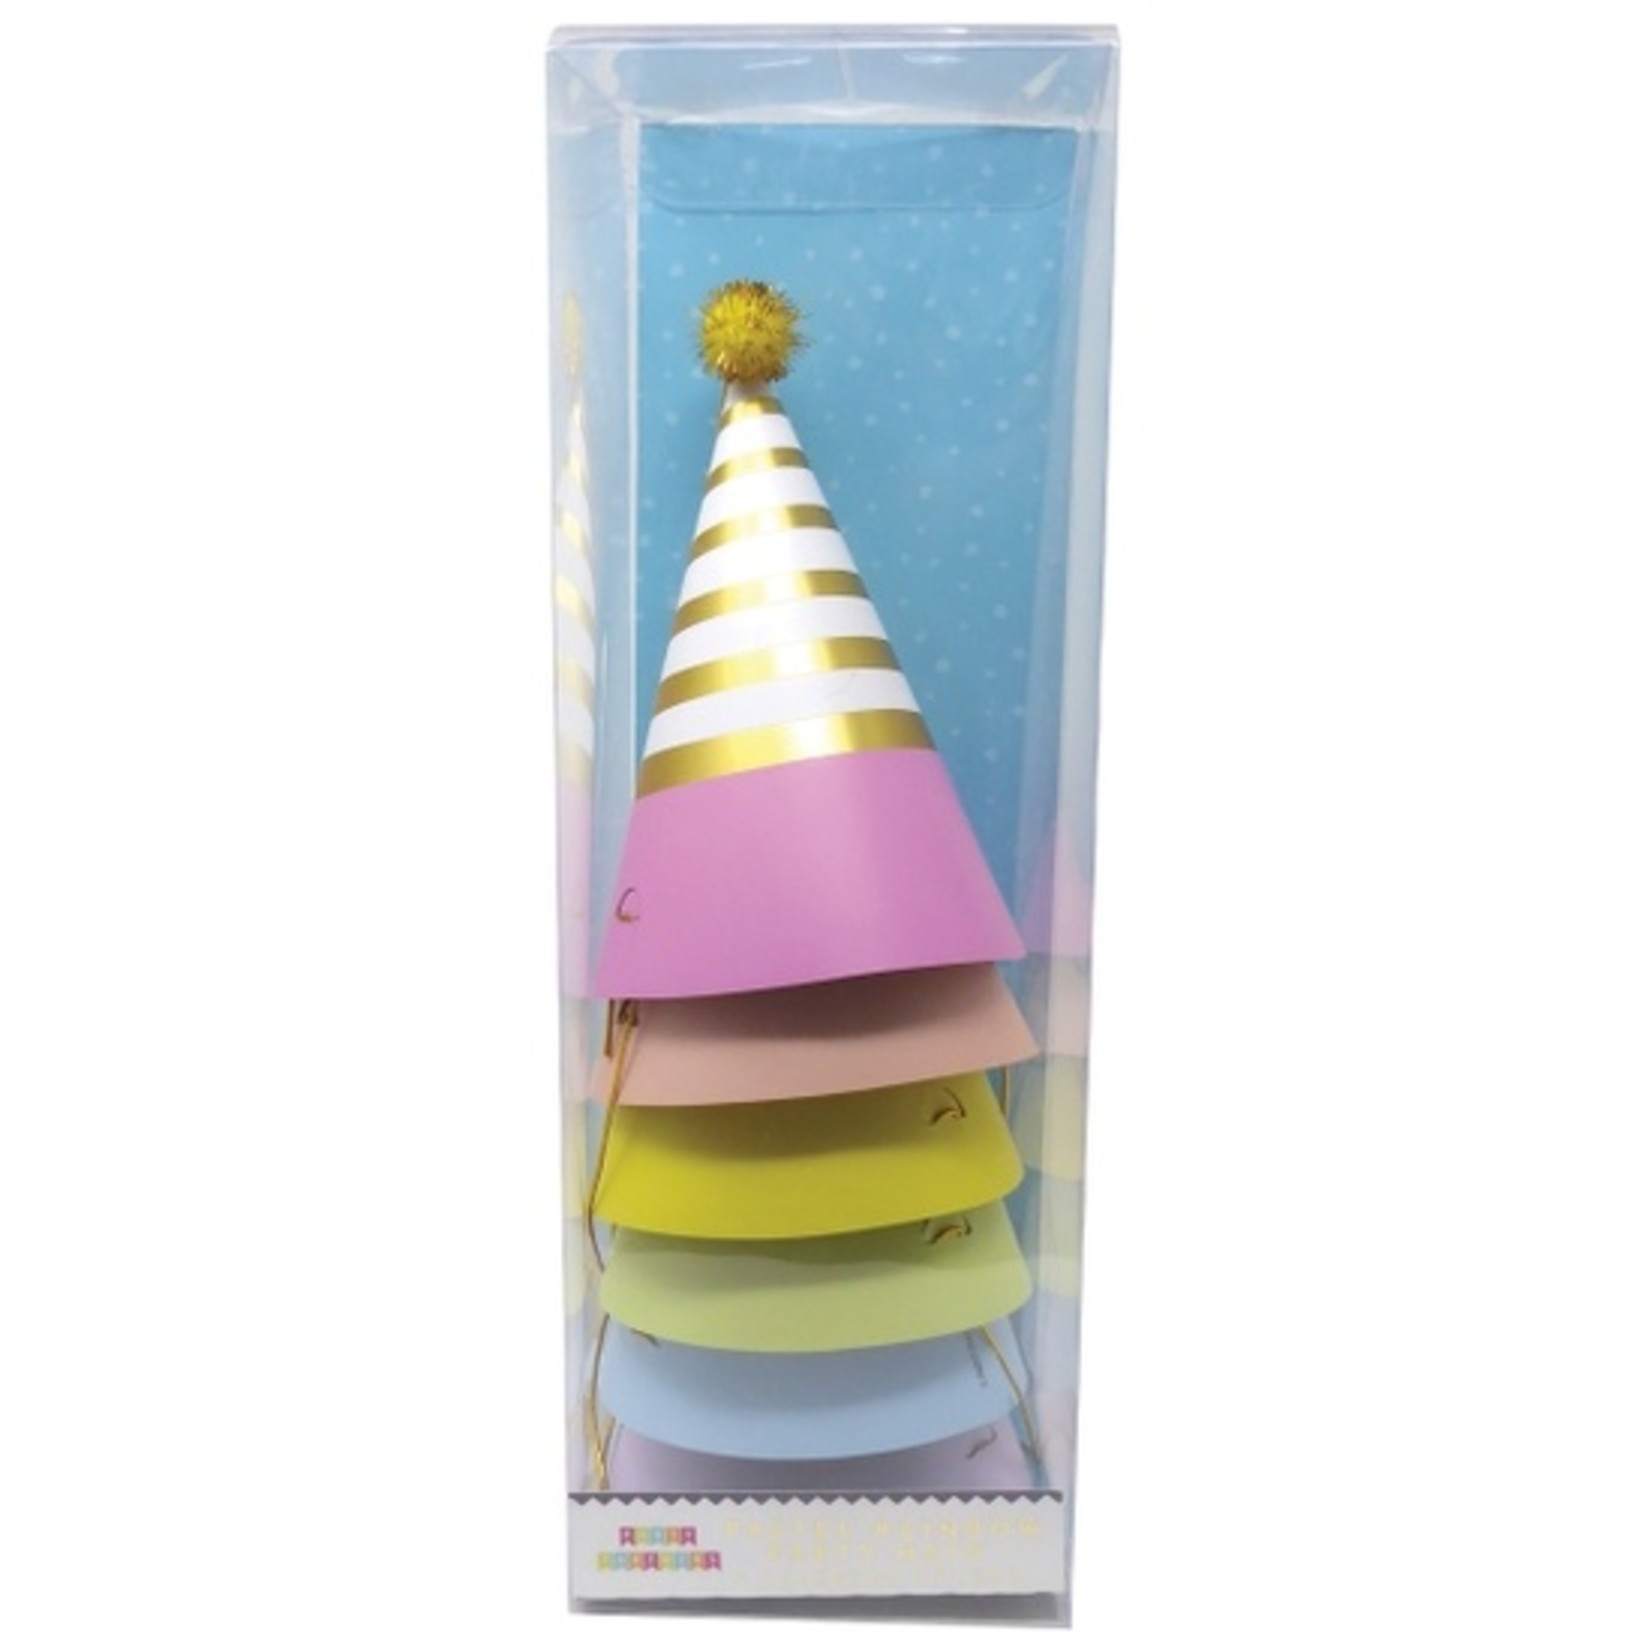 6 Stunning Pastel Party Hats, 6 Pastel Party Hats, Pastel Party